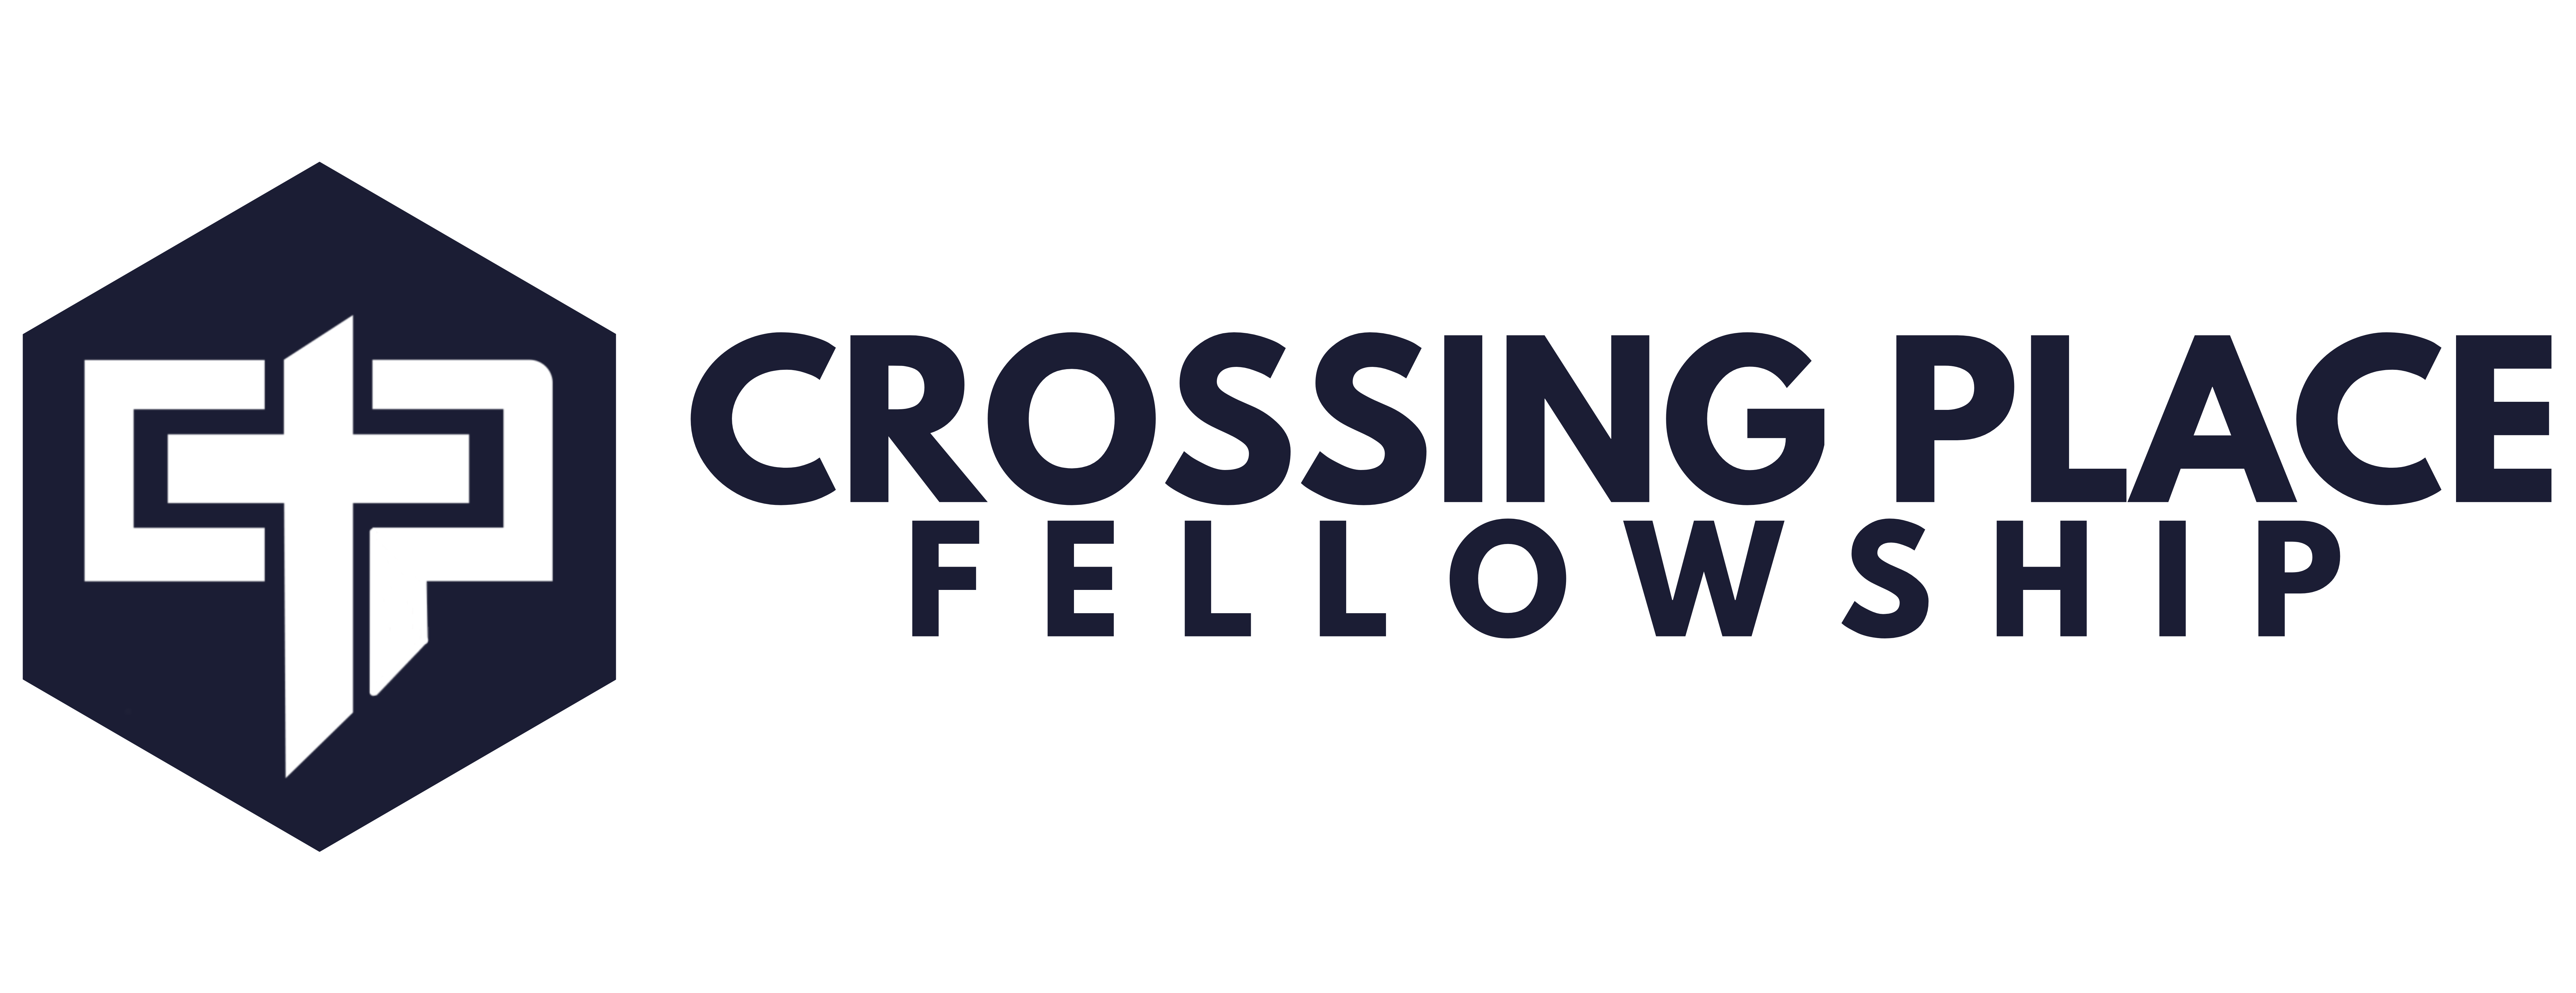 Crossing Place Fellowship